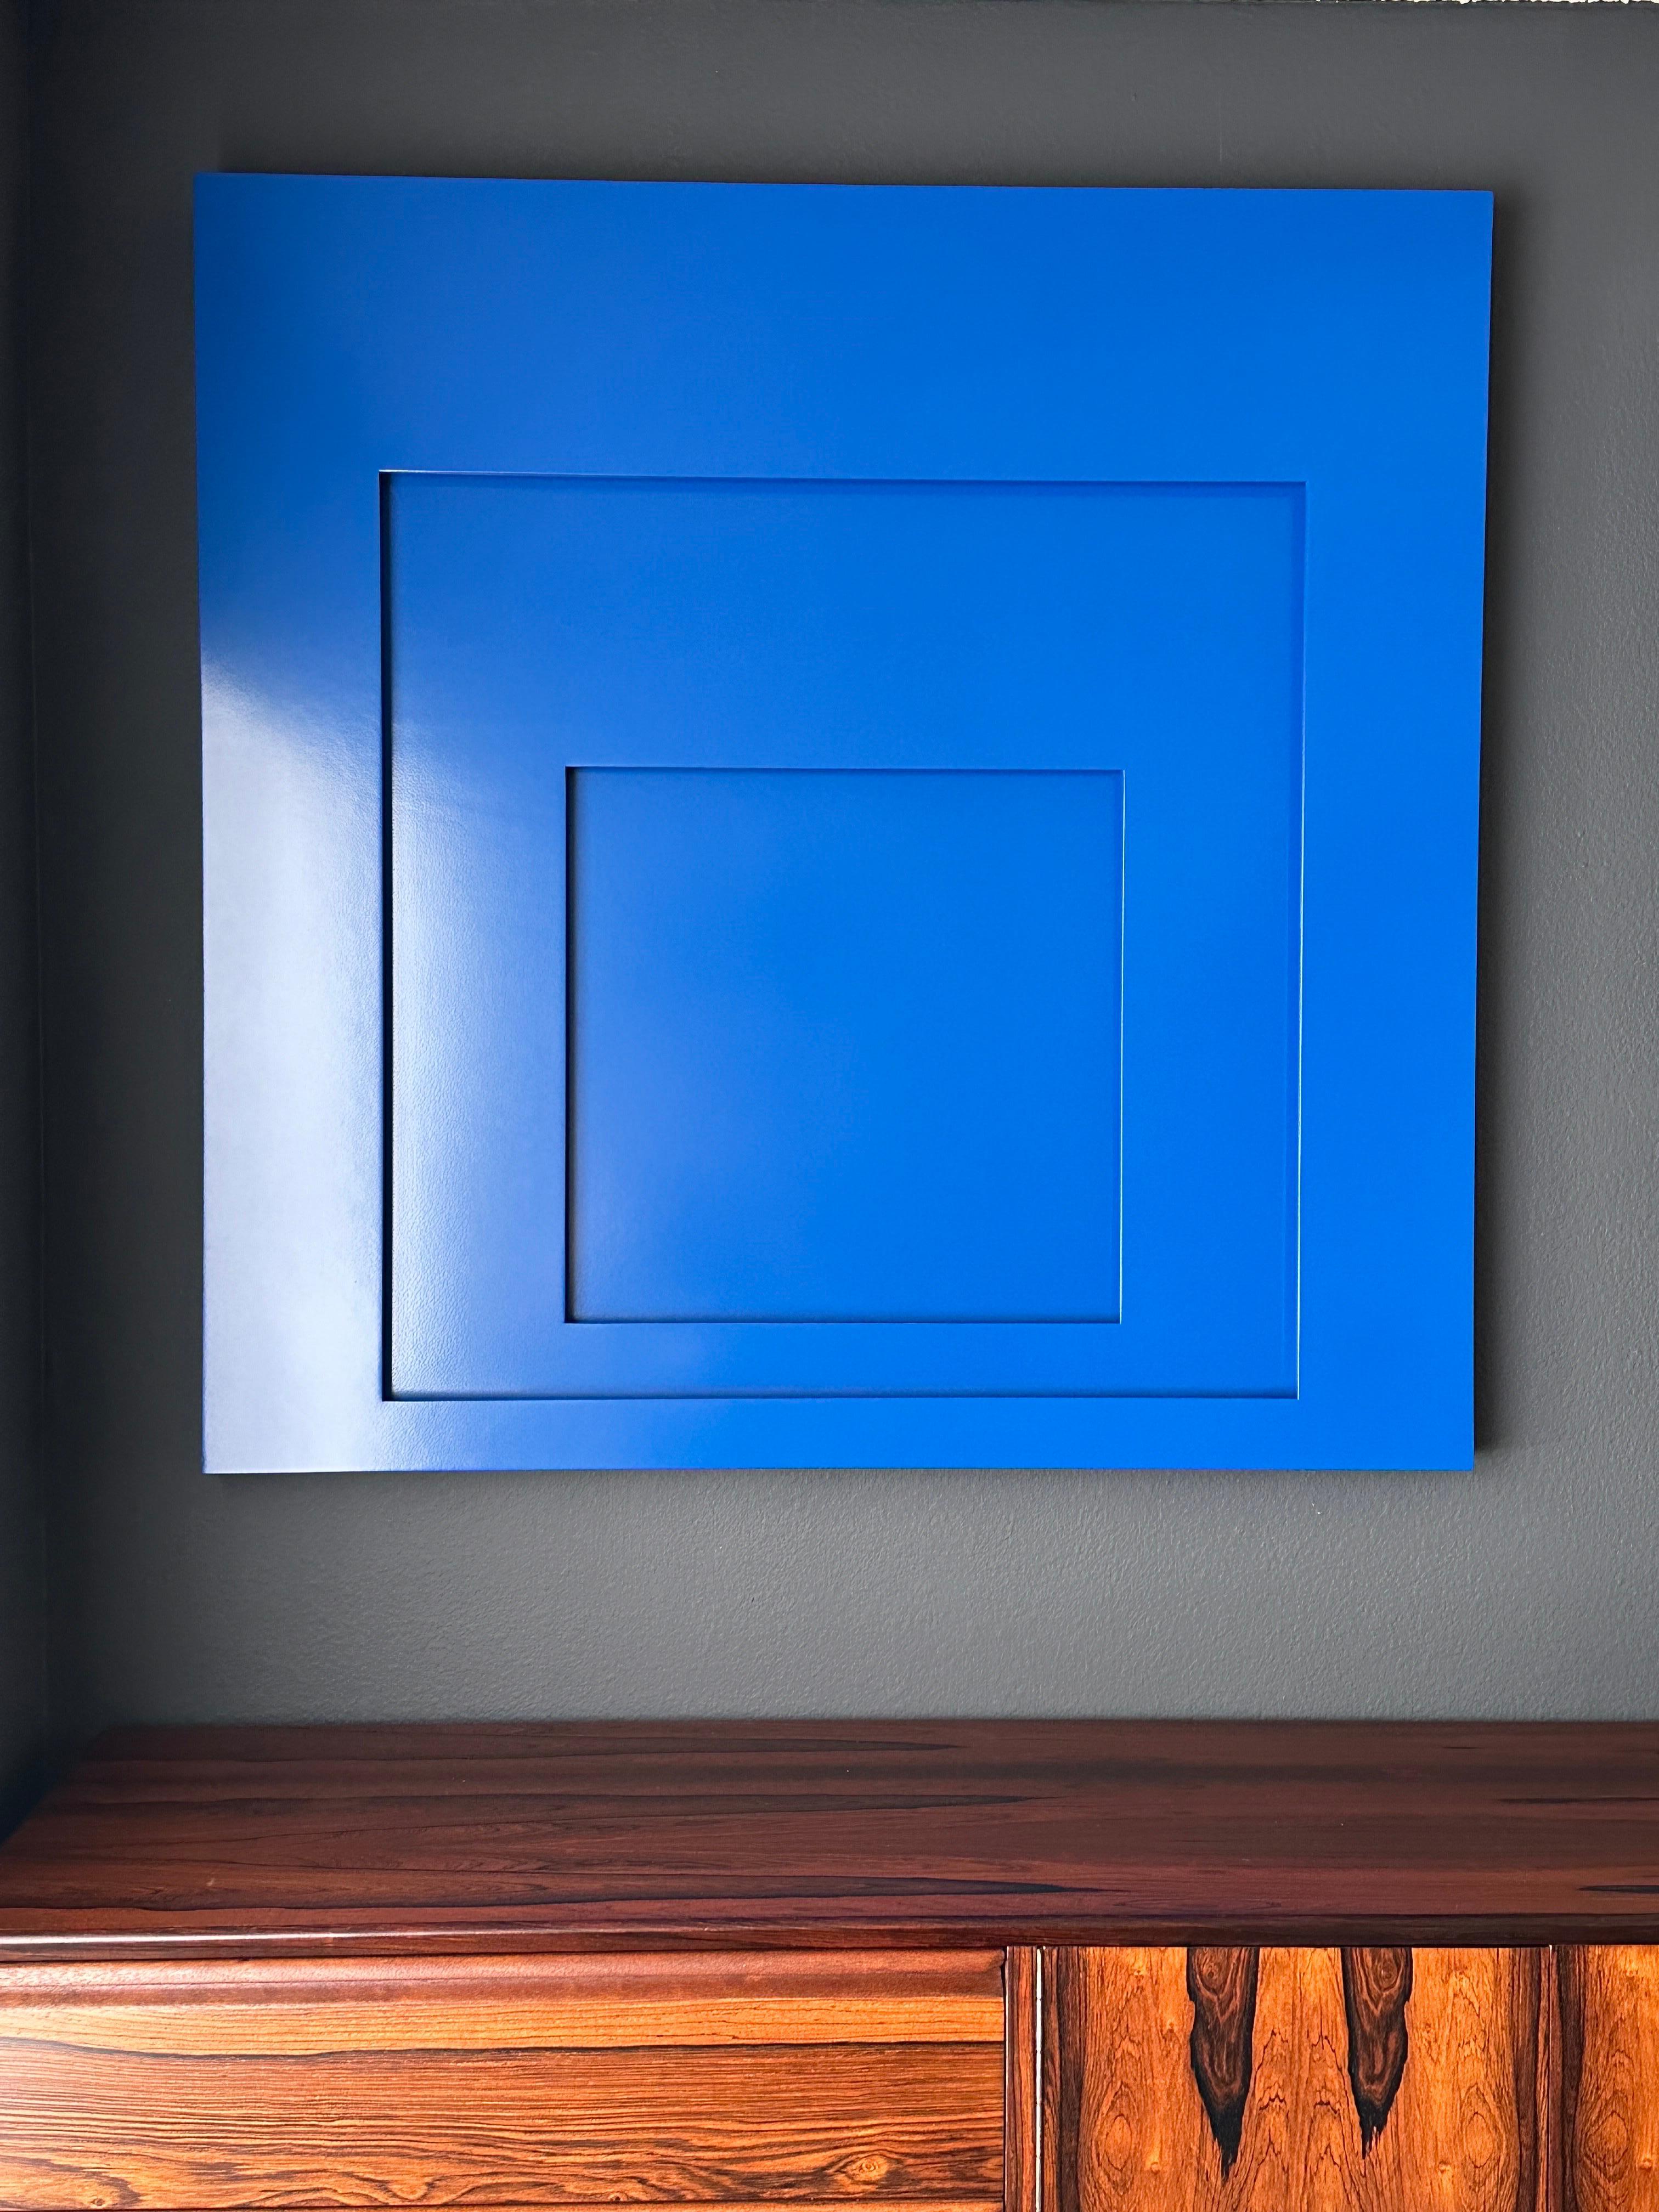 “Blue No5” 3D sculpture / wall hanging decor in the style of Josef Albers “Homage to Square”.